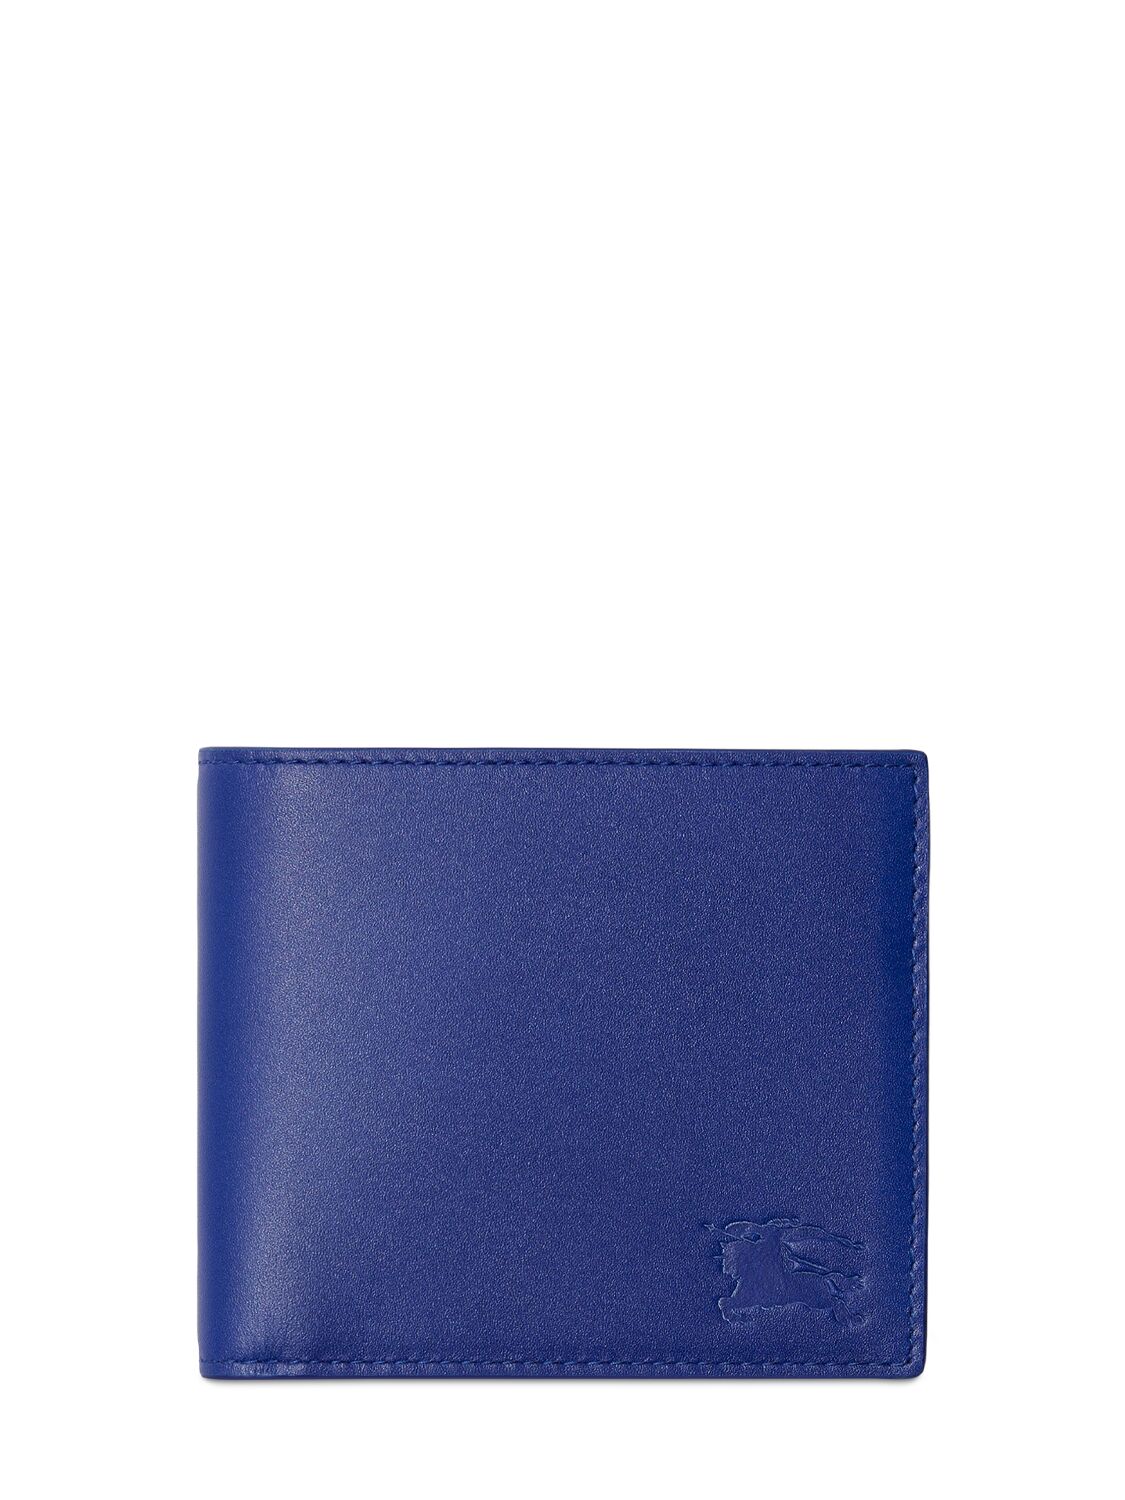 Image of Check Embossed Leather Wallet